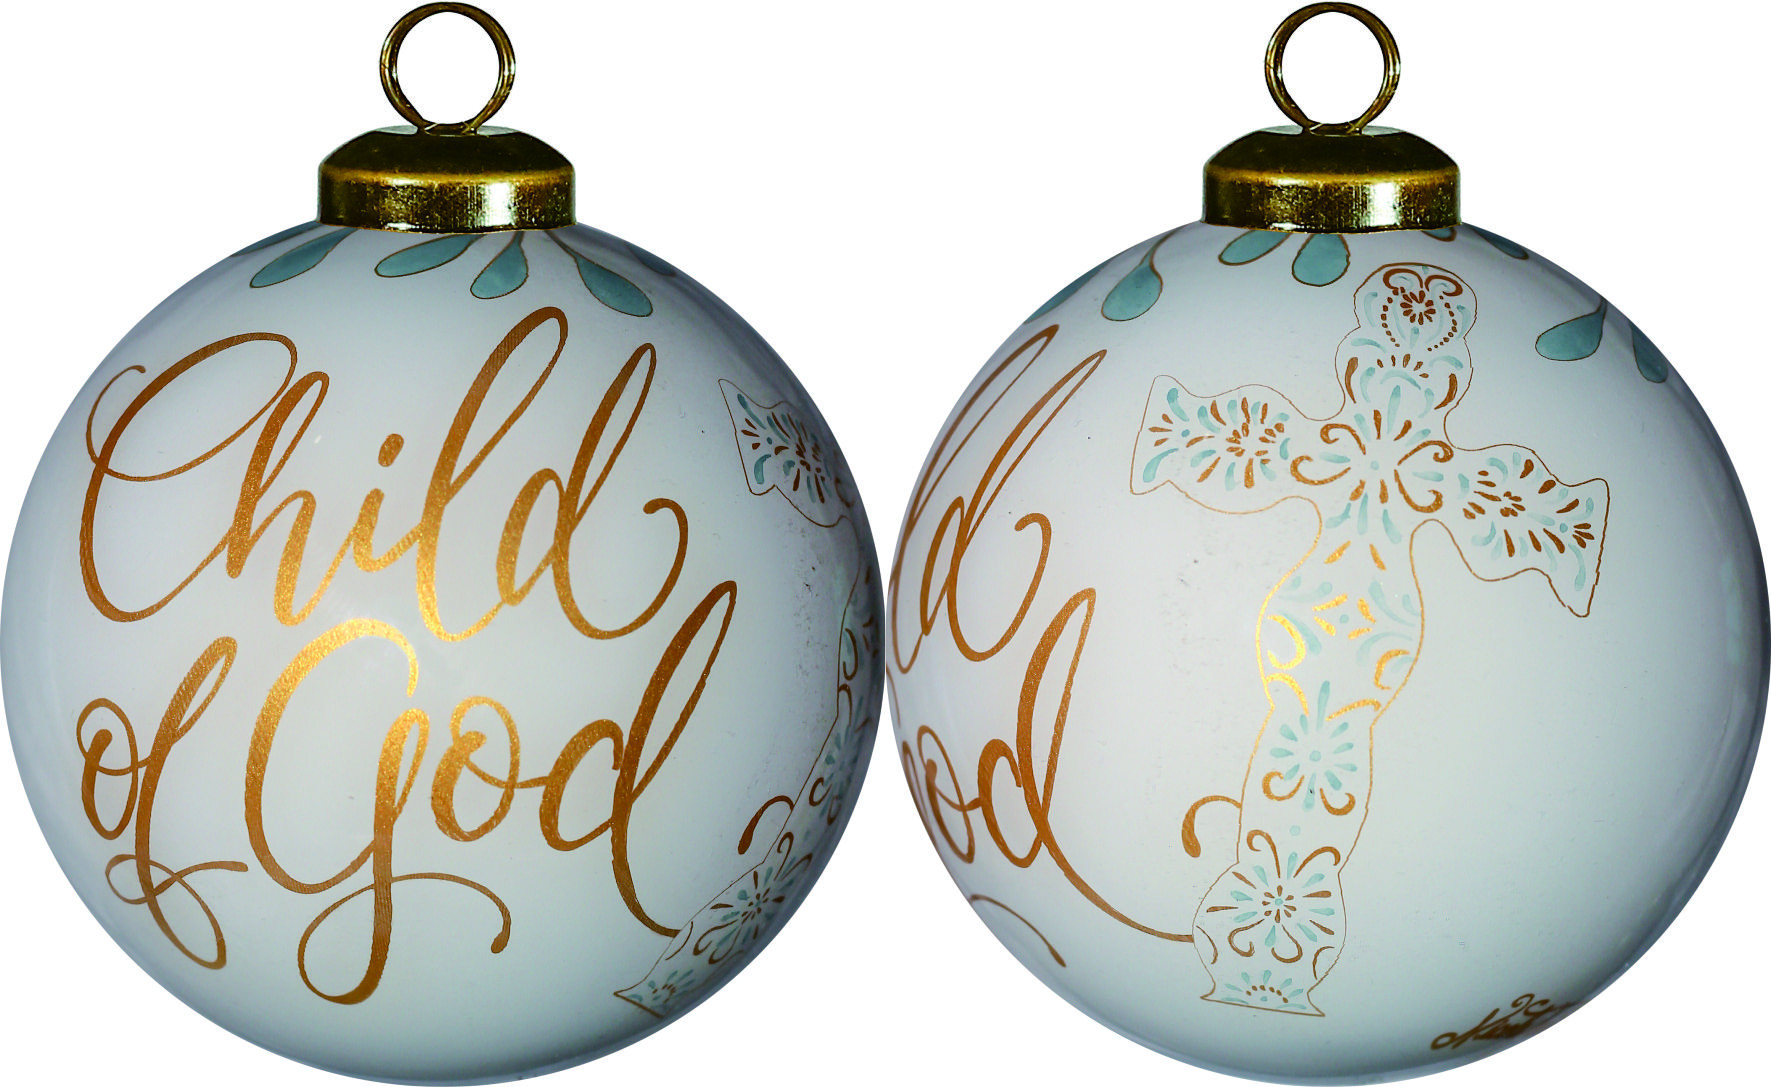 White and Gold Child of God Hand Painted Mouth Blown Glass Ornament